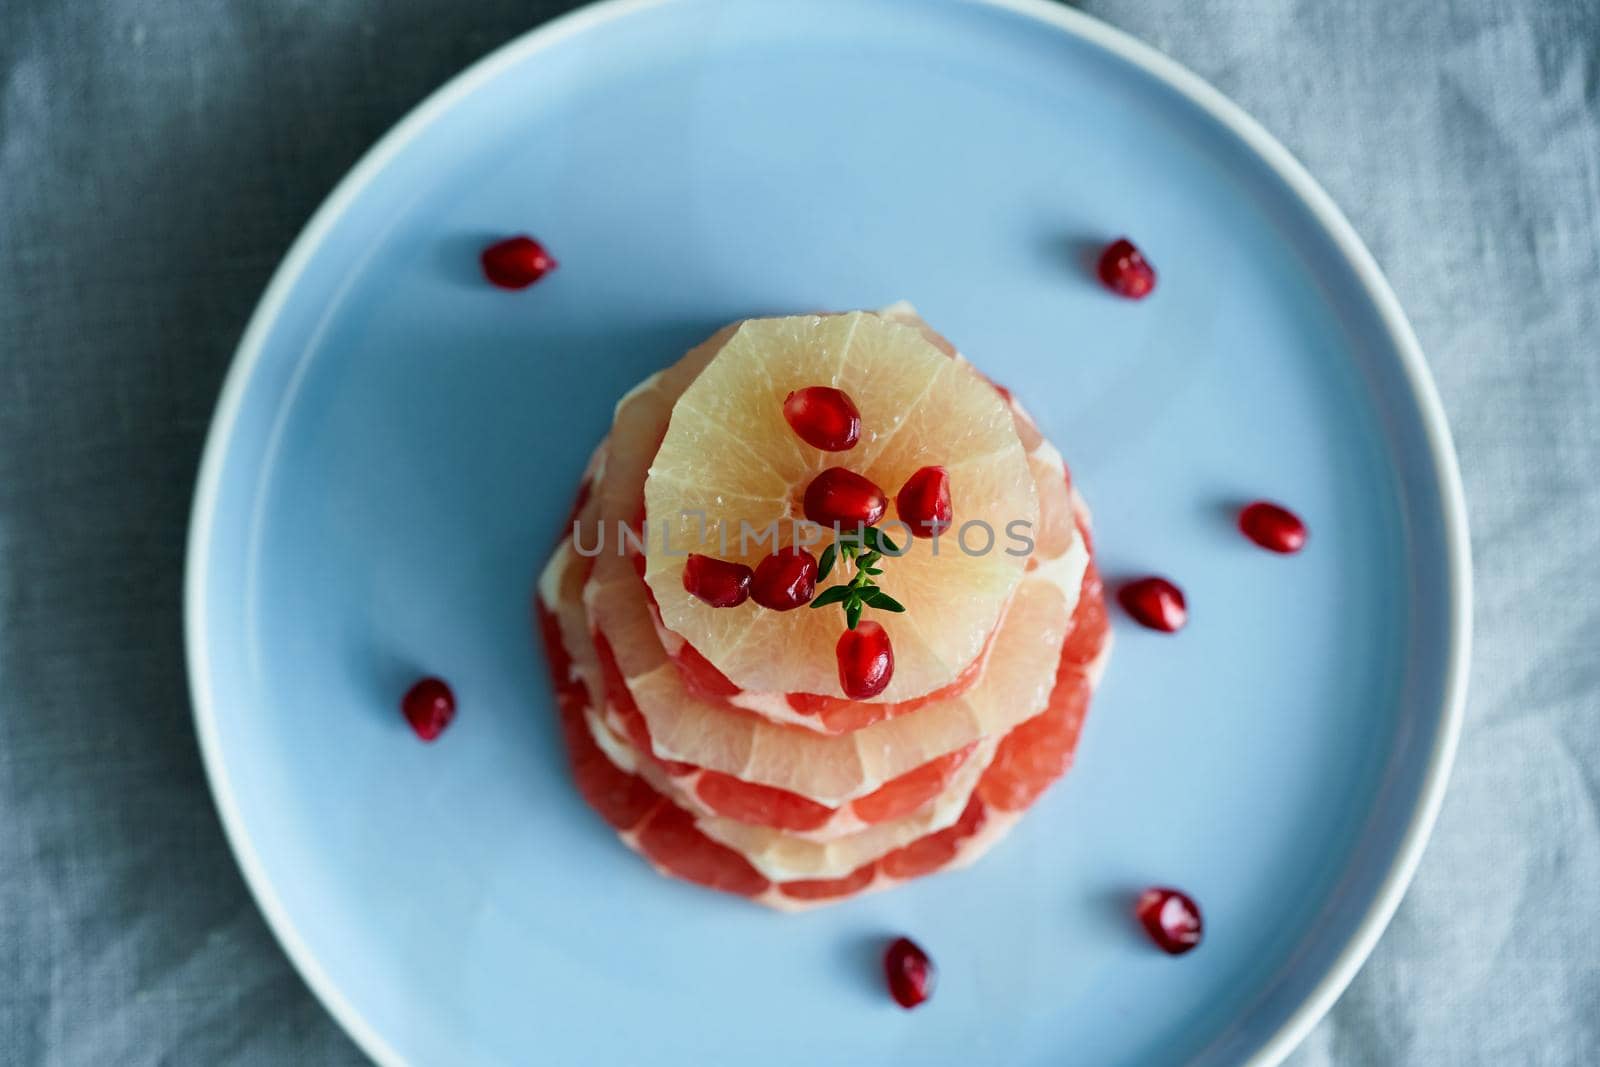 Top view stack of sliced round slices of red and white grapefruit sprinkled with pomegranate seeds on blue plate. Bright mix of citrus fruits